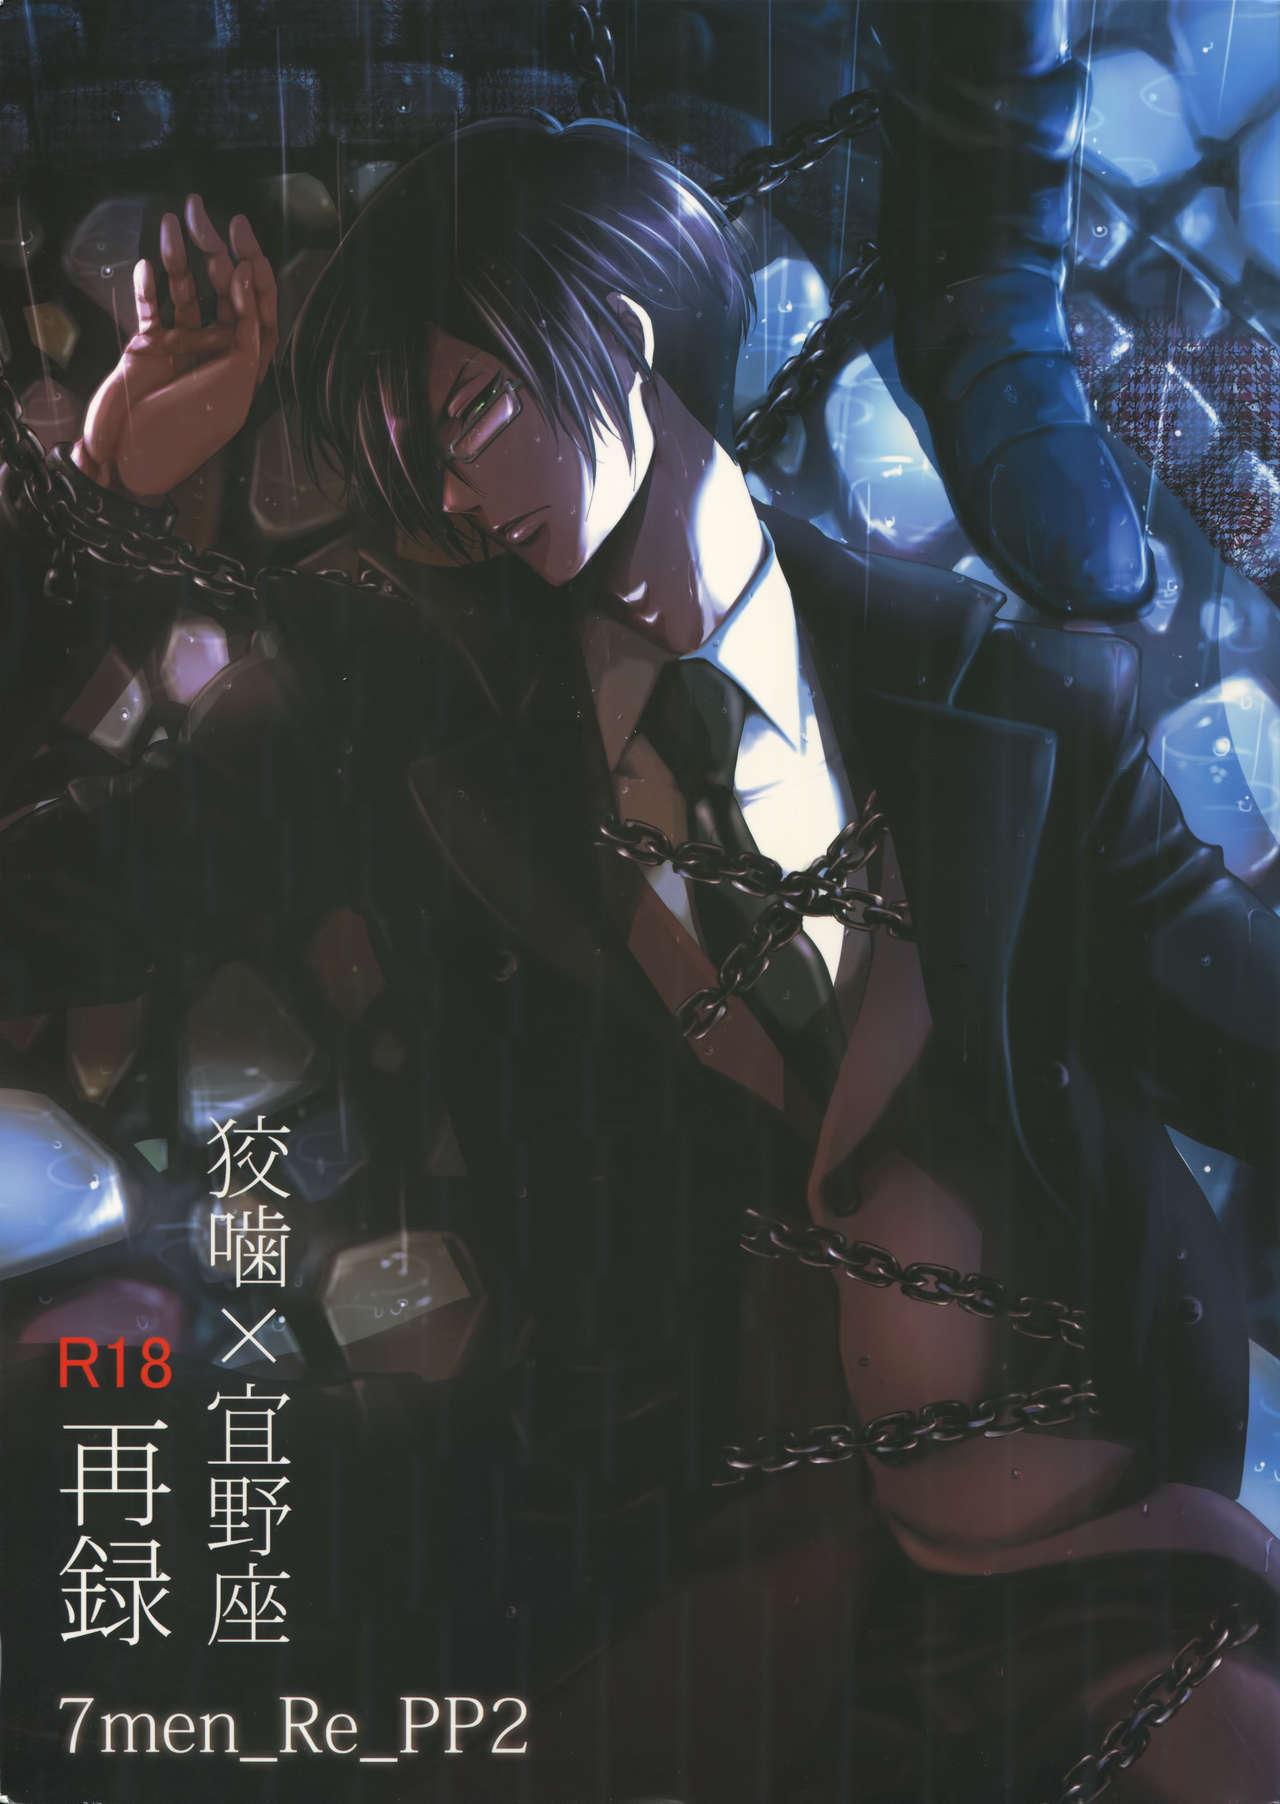 Dyke 7men_Re_PP2 - Psycho pass Bwc - Picture 1